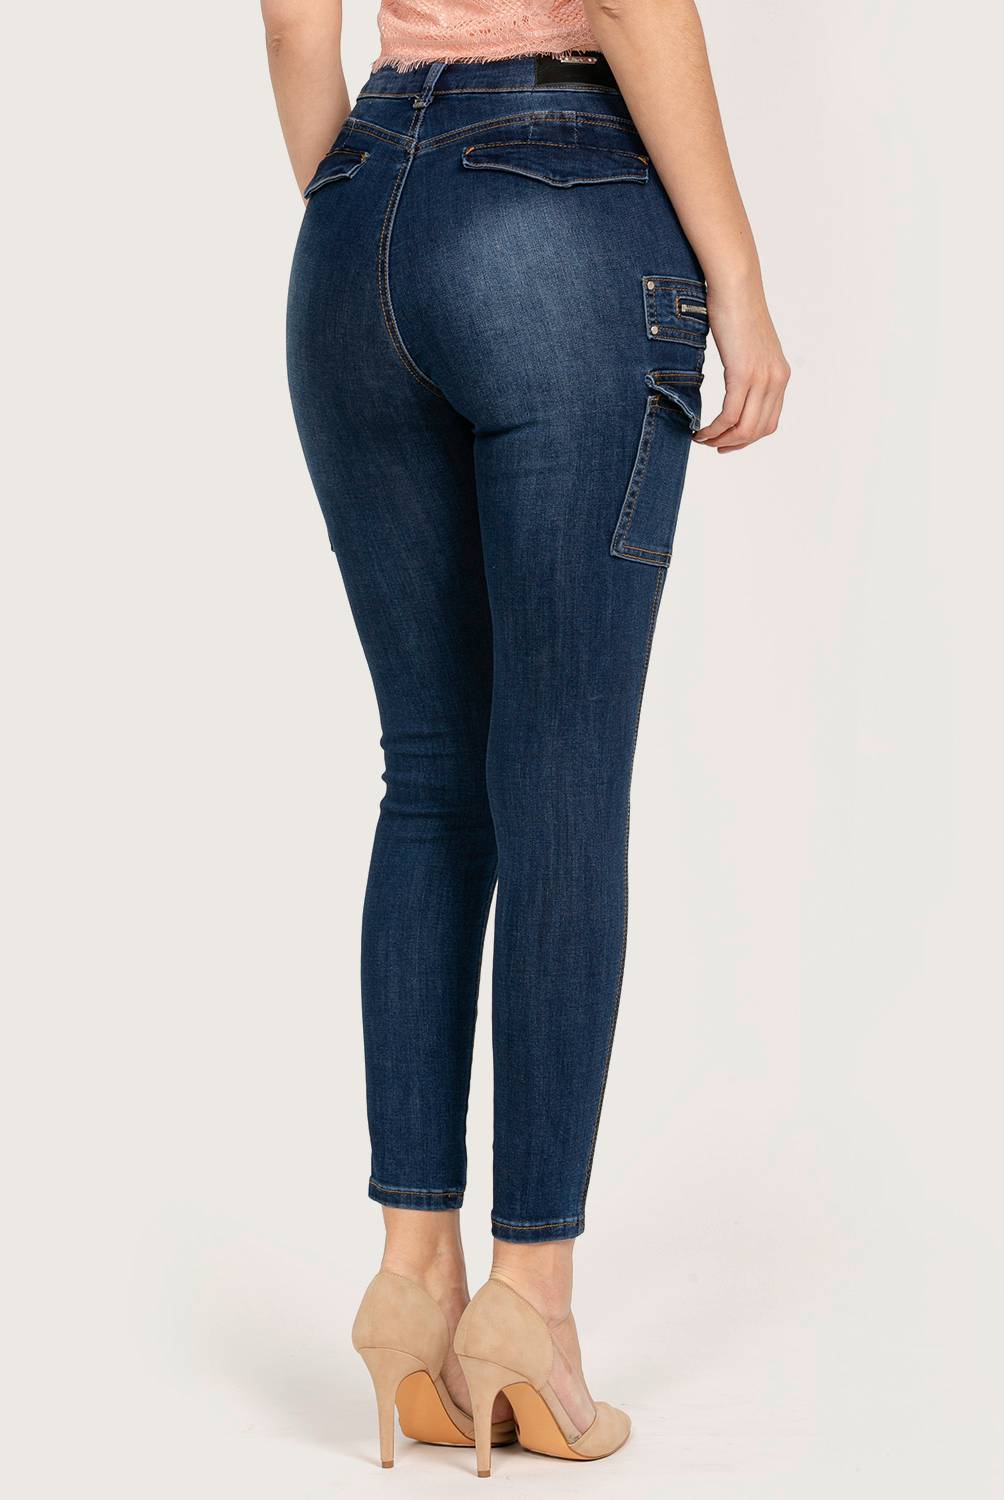 MOSSIMO - Jeans Skinny Push Up Mujer